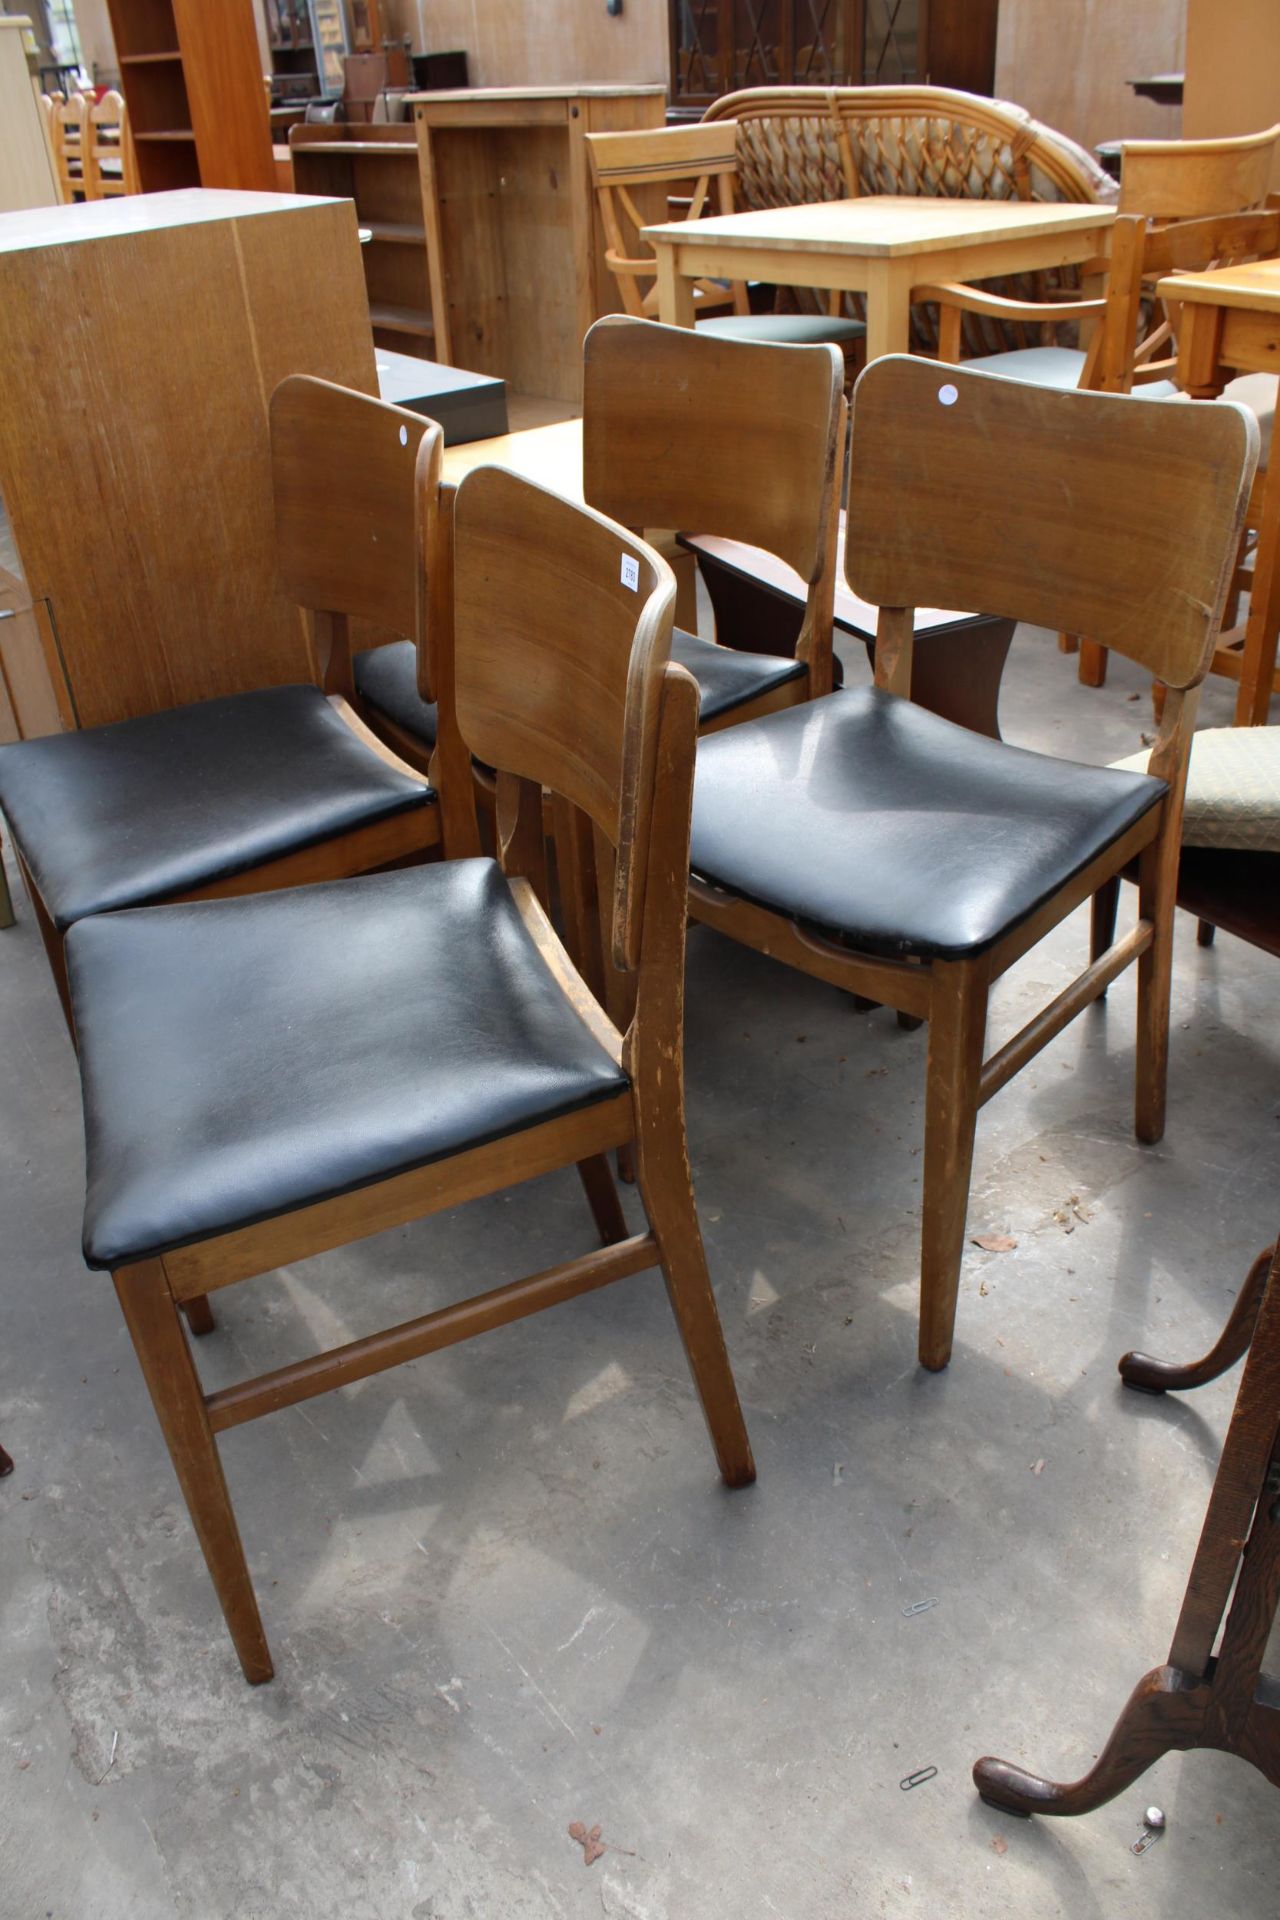 A SET OF FOUR RETRO BEAUTILITY DINING CHAIRS - Image 2 of 2